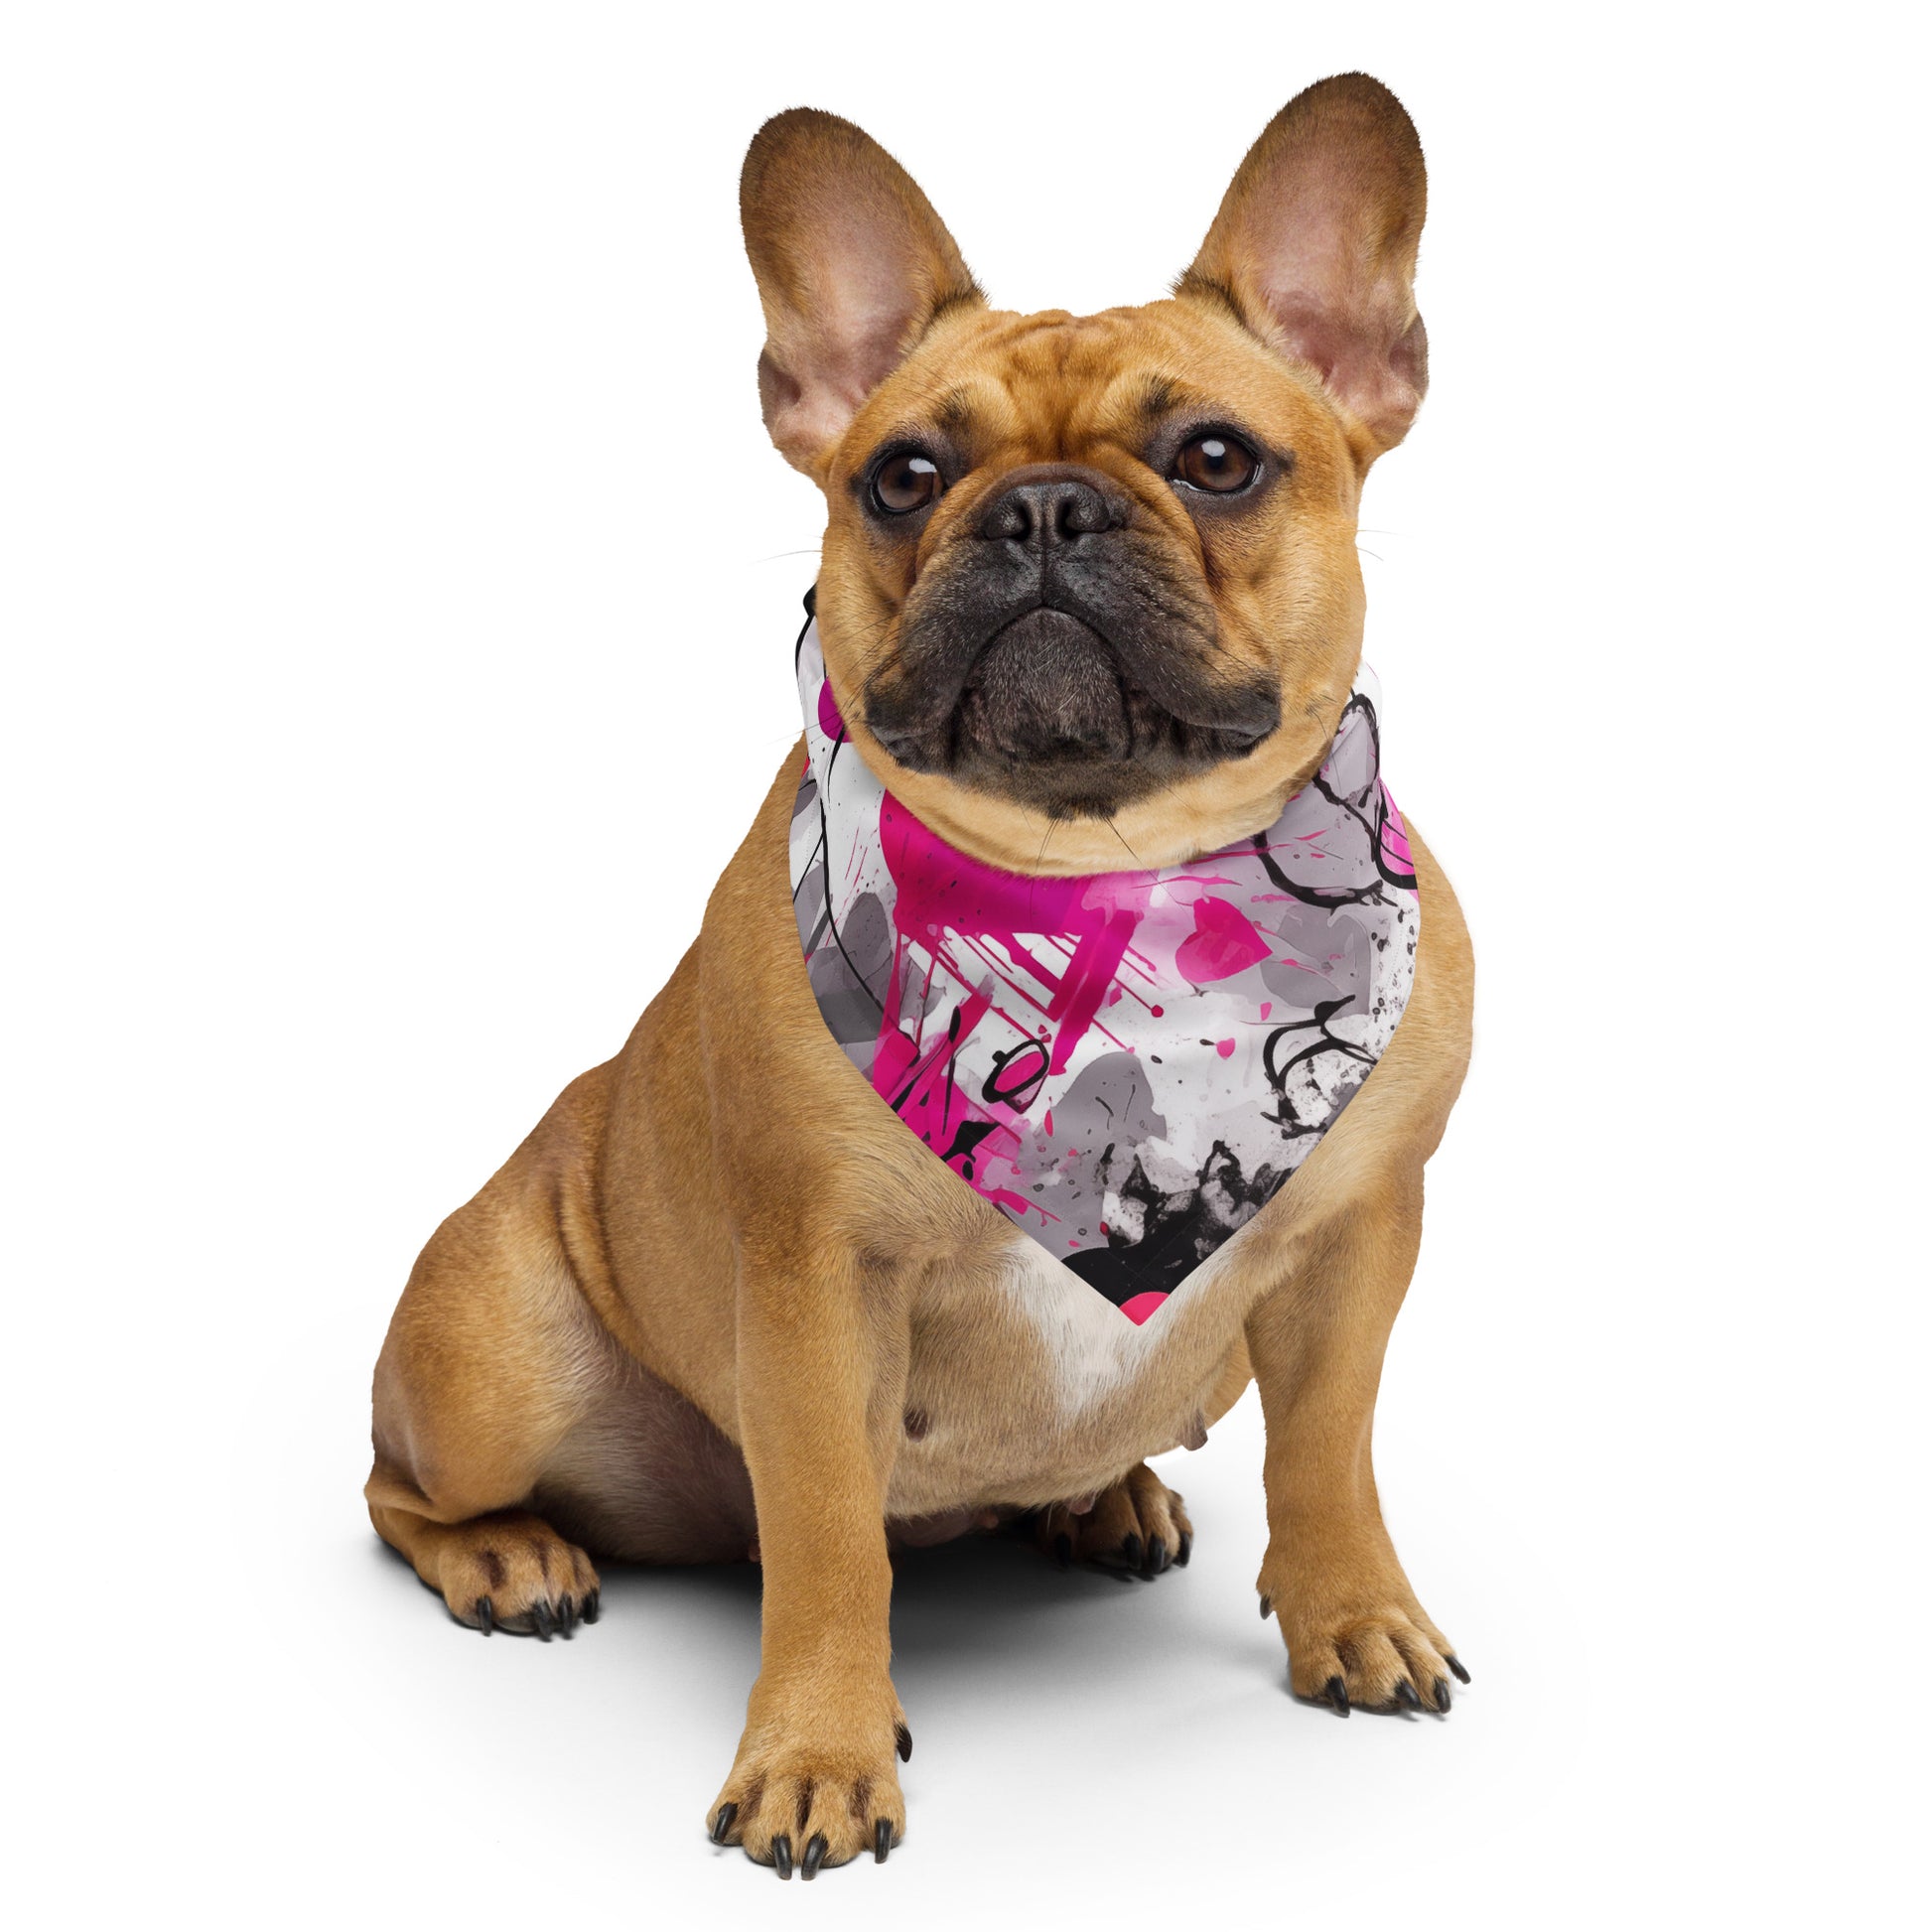 Perfect for your furry friends too! The MeaKulpa Bandana Collection adds a touch of street-style flair to your pet's look. Match your fashion with your four-legged companion.